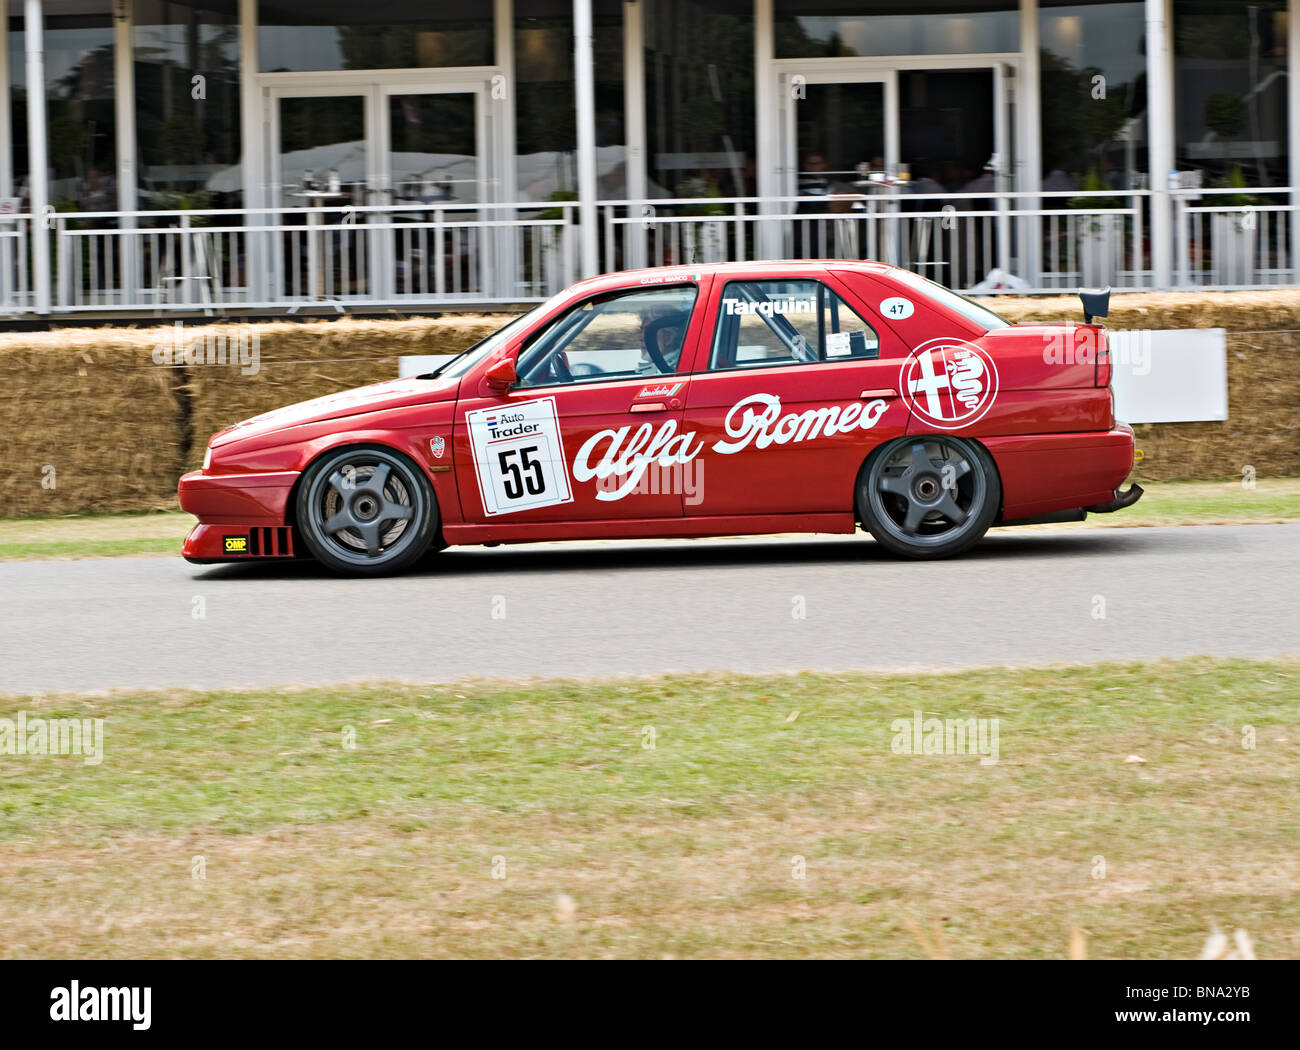 Alfa Romeo 155TS Touring Race Car at Goodwood Festival of Speed West Sussex England United Kingdom UK Stock Photo